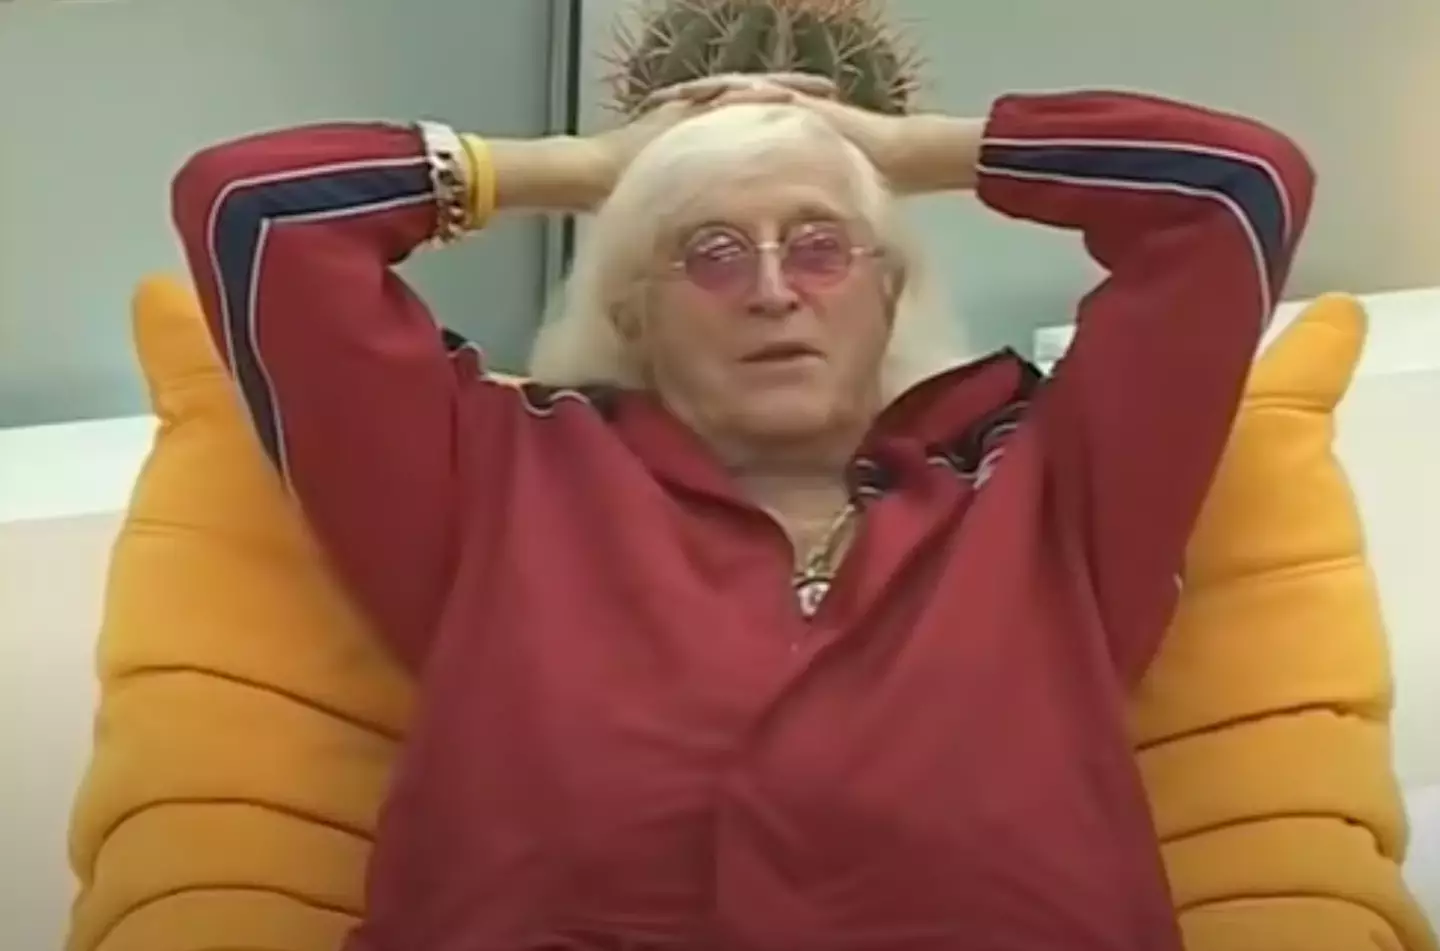 Jimmy Savile once appeared on Celebrity Big Brother.